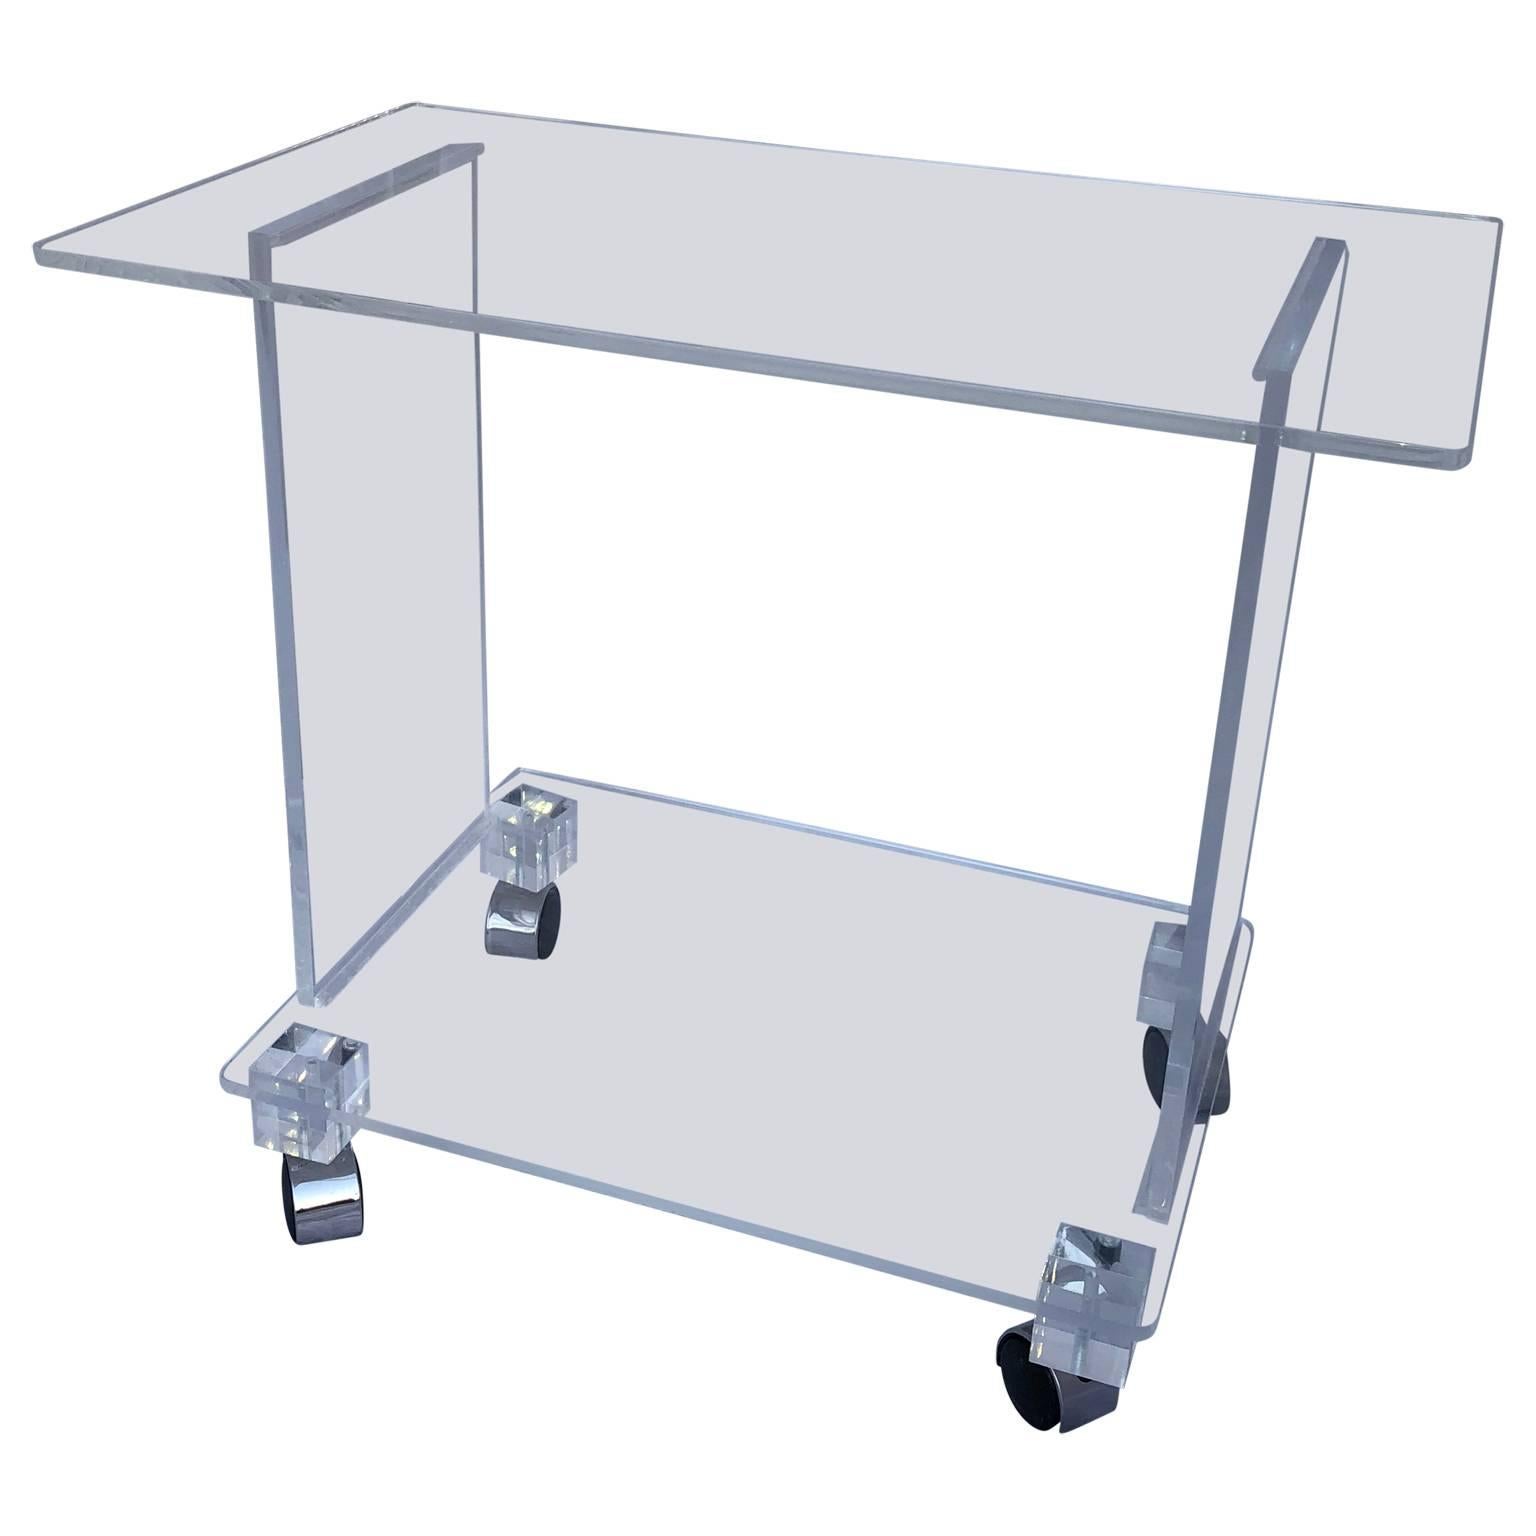 Late 20th Century clear Lucite bar cart on chrome casters

